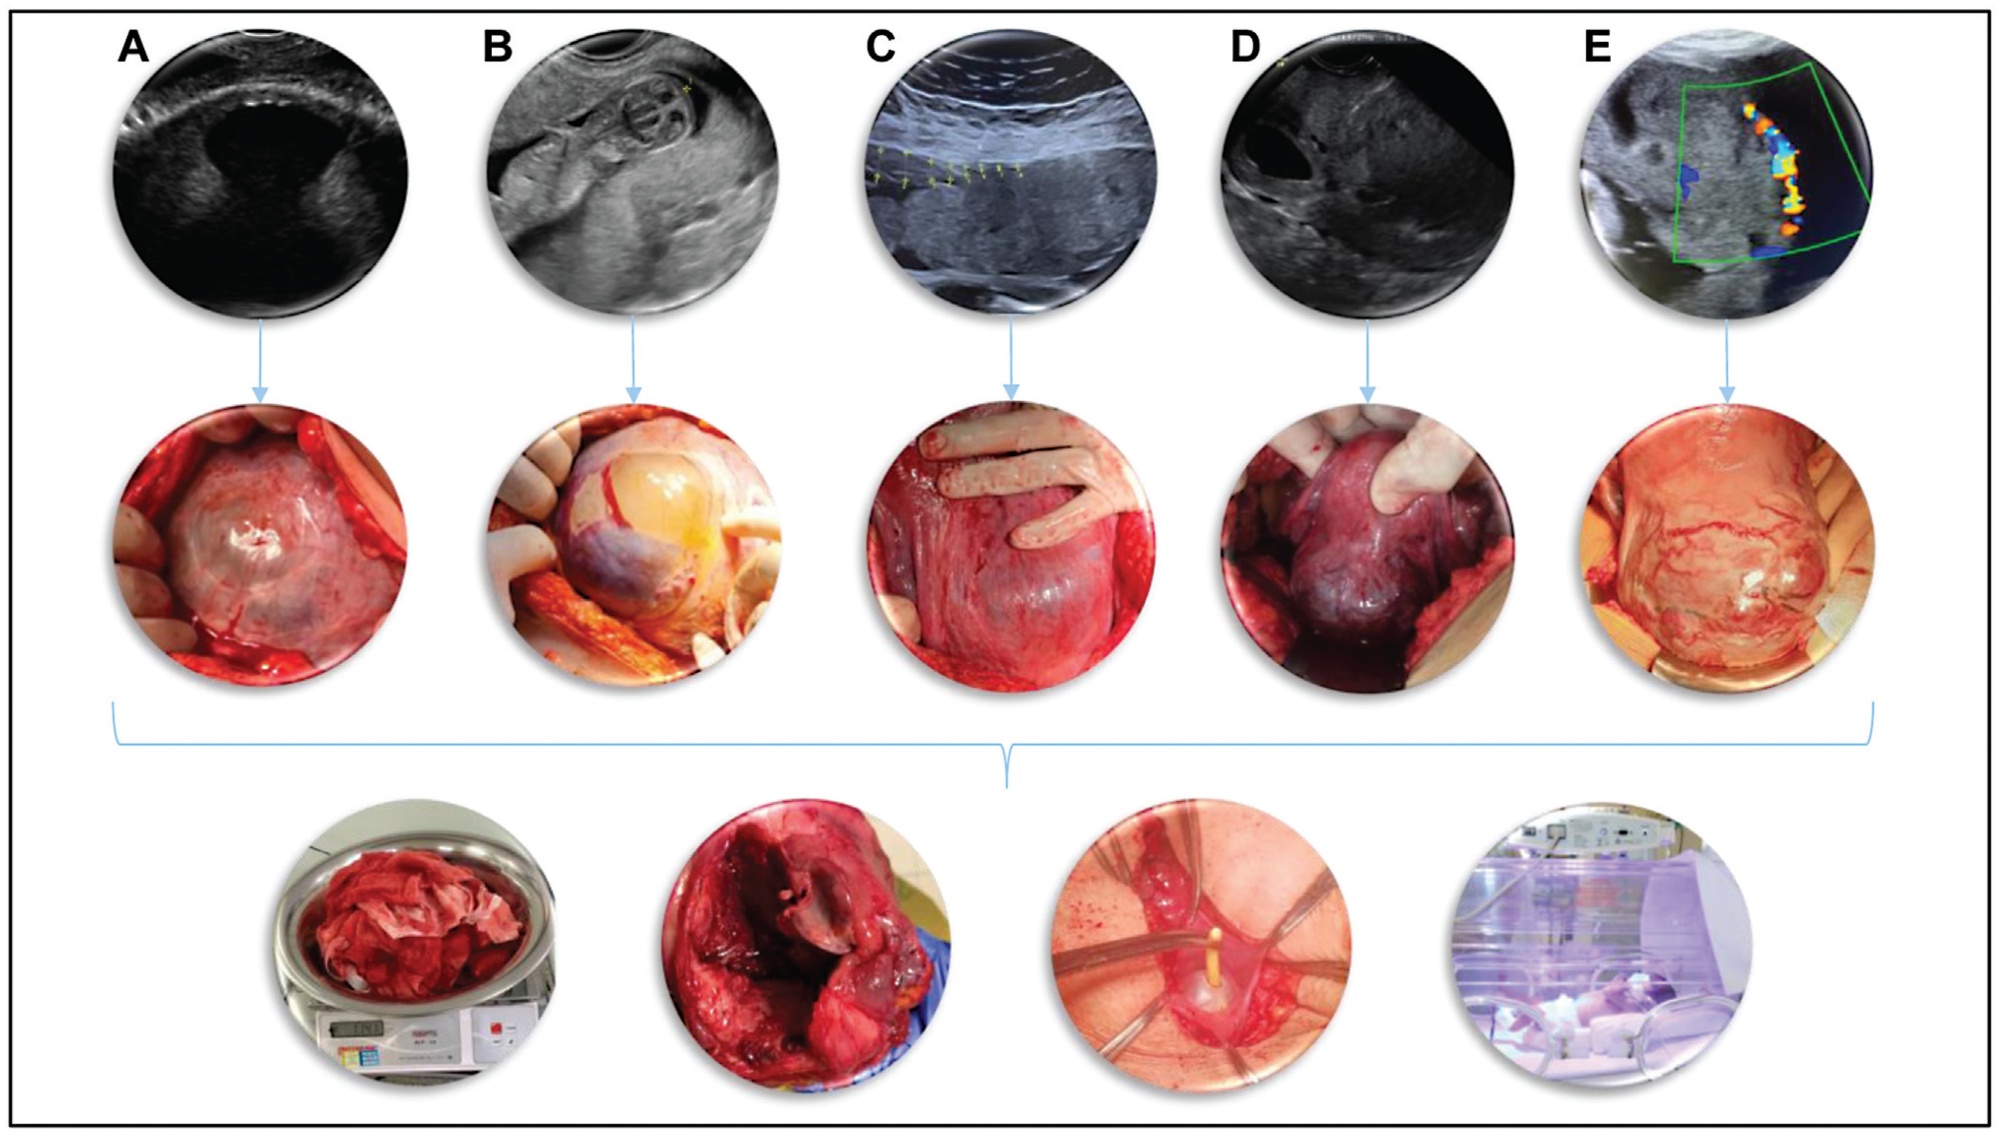 Placenta Accreta Spectrum Disorders: Current Recommendations from the Perspective of Antenatal Imaging